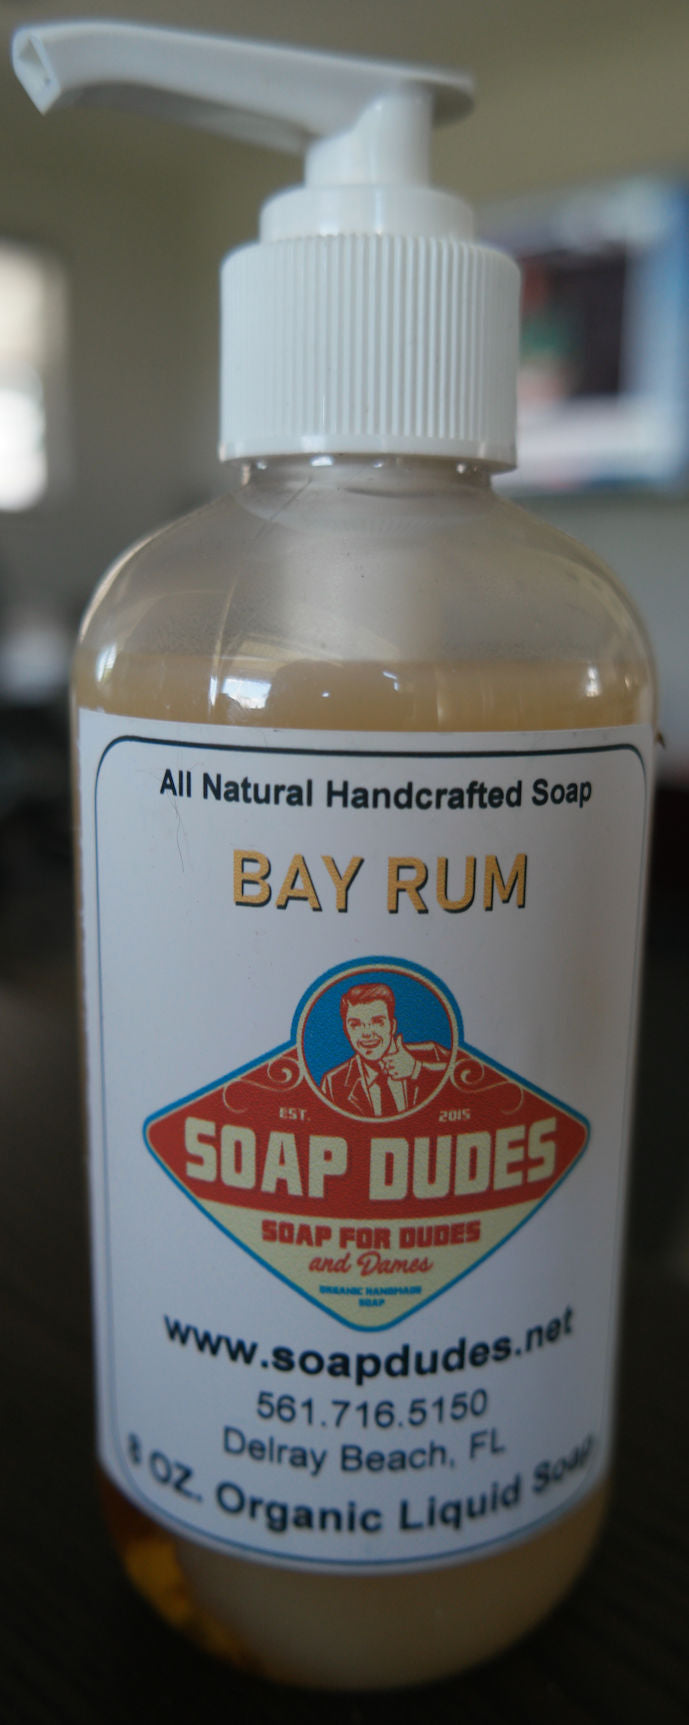 Natural Bay Rum Soap for Men, 4oz Orange & Clove Spice Scented Bar Soap –  Made in USA Manly Smelling…See more Natural Bay Rum Soap for Men, 4oz  Orange